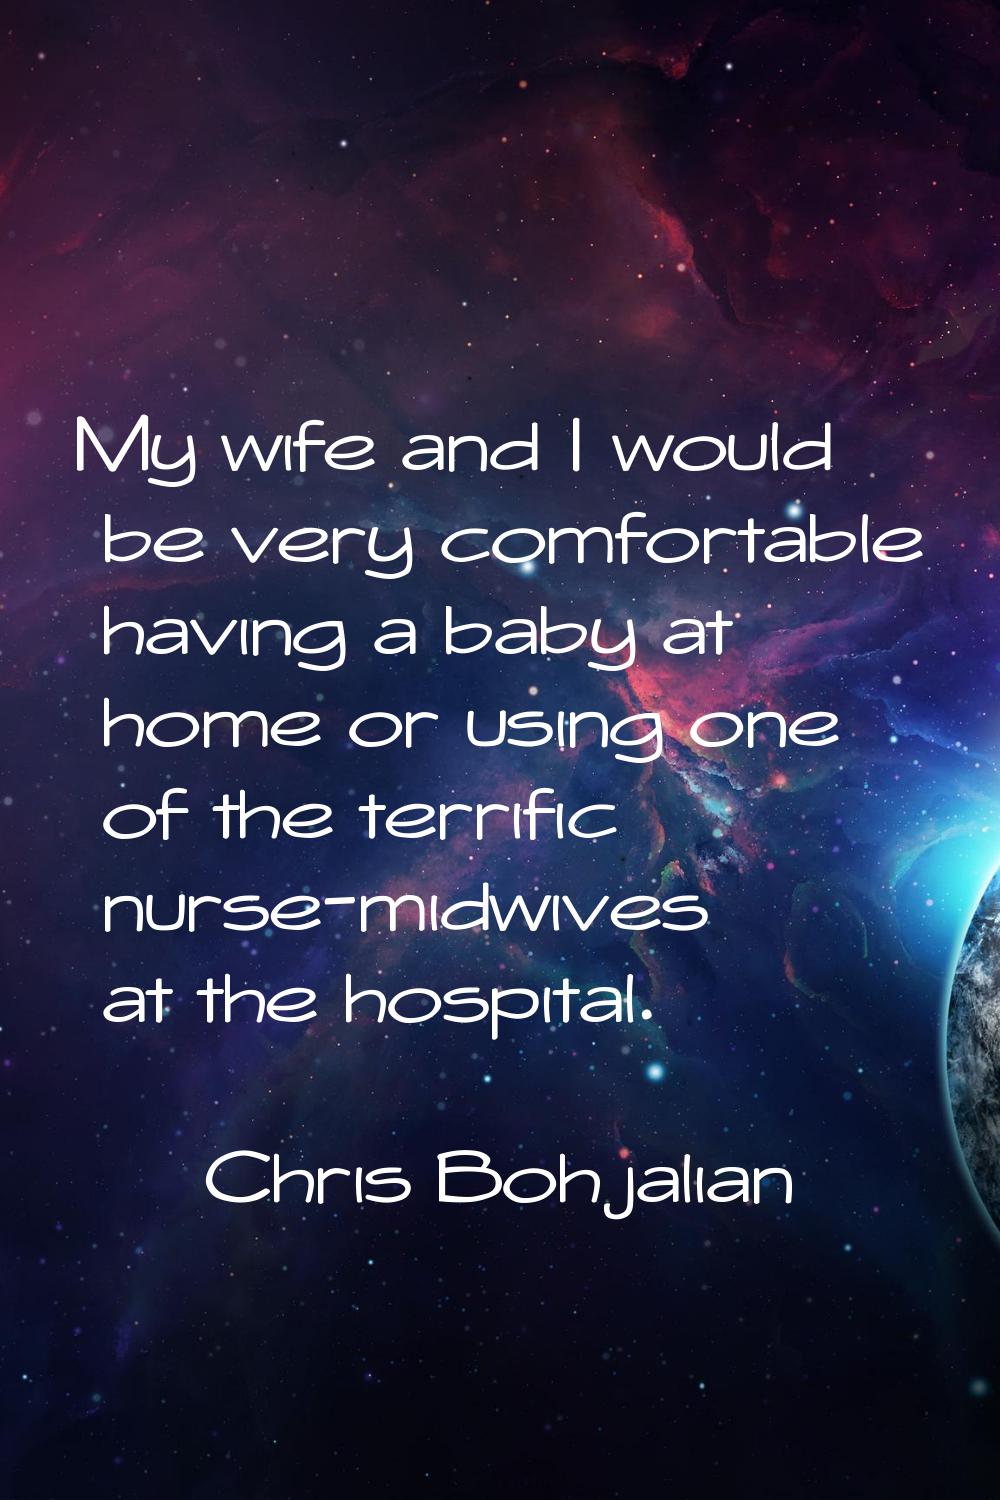 My wife and I would be very comfortable having a baby at home or using one of the terrific nurse-mi